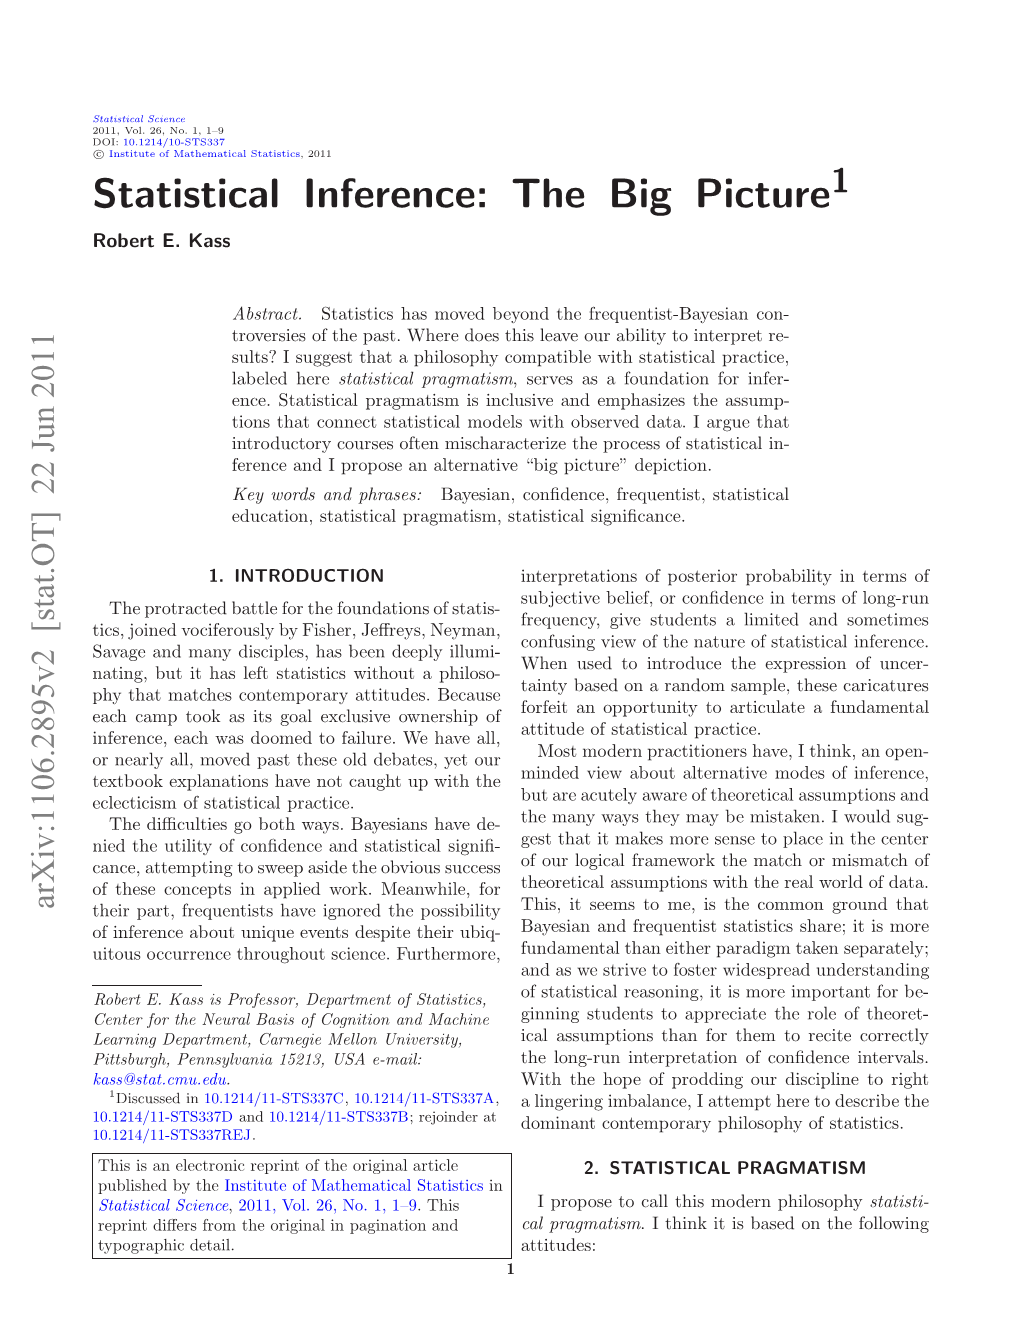 Statistical Inference: the Big Picture